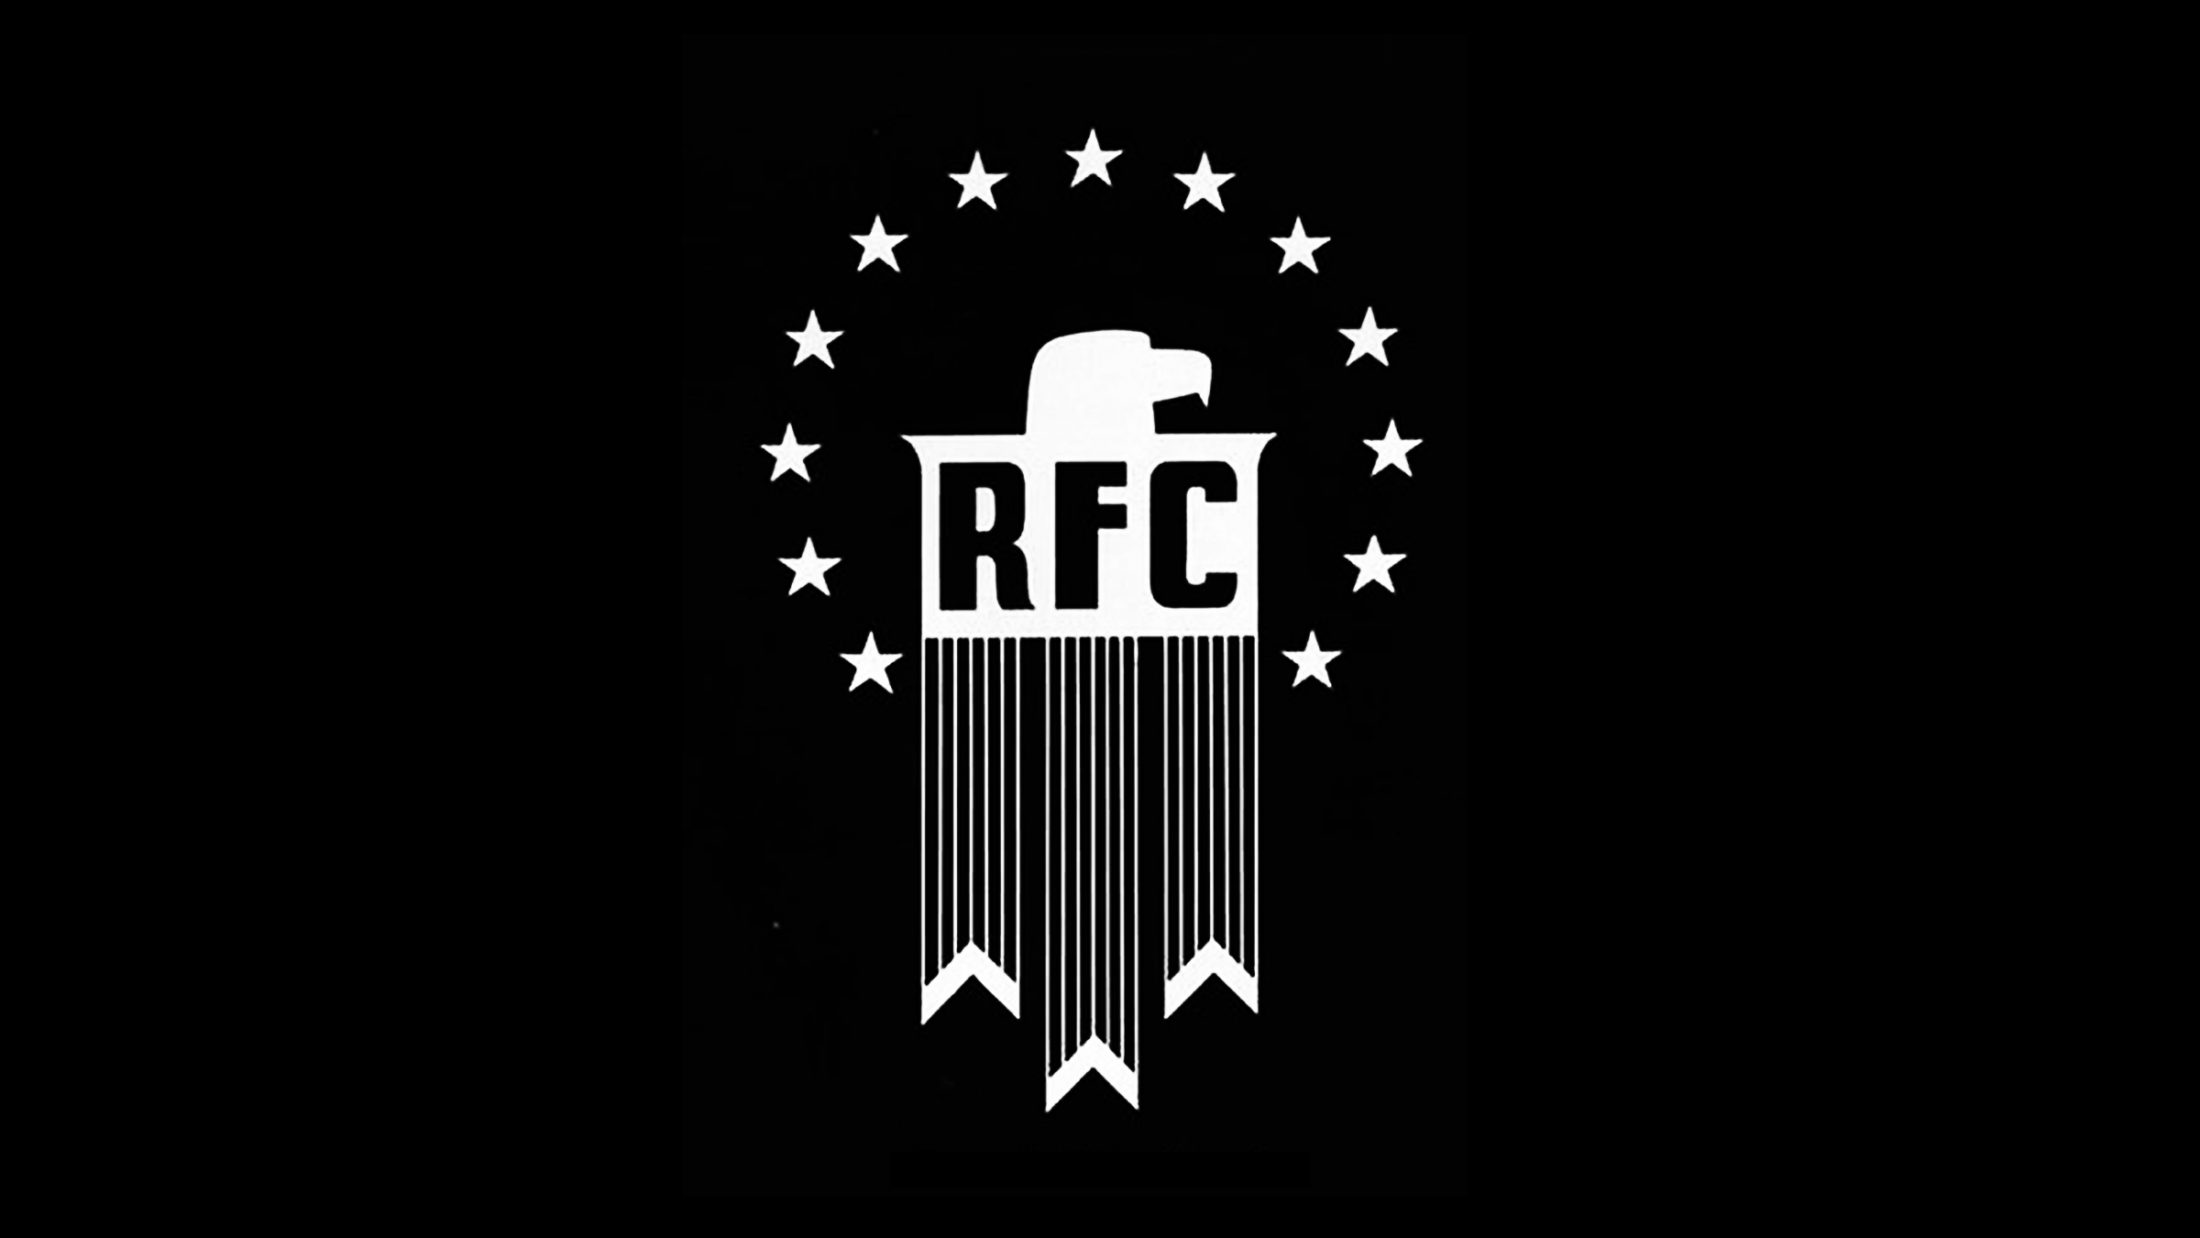 The Reconstruction Finance Corporation (RFC) logo somehow manages to be eagle-centric, authoritarian, and vaguely Native-culture-appropriating all at once.